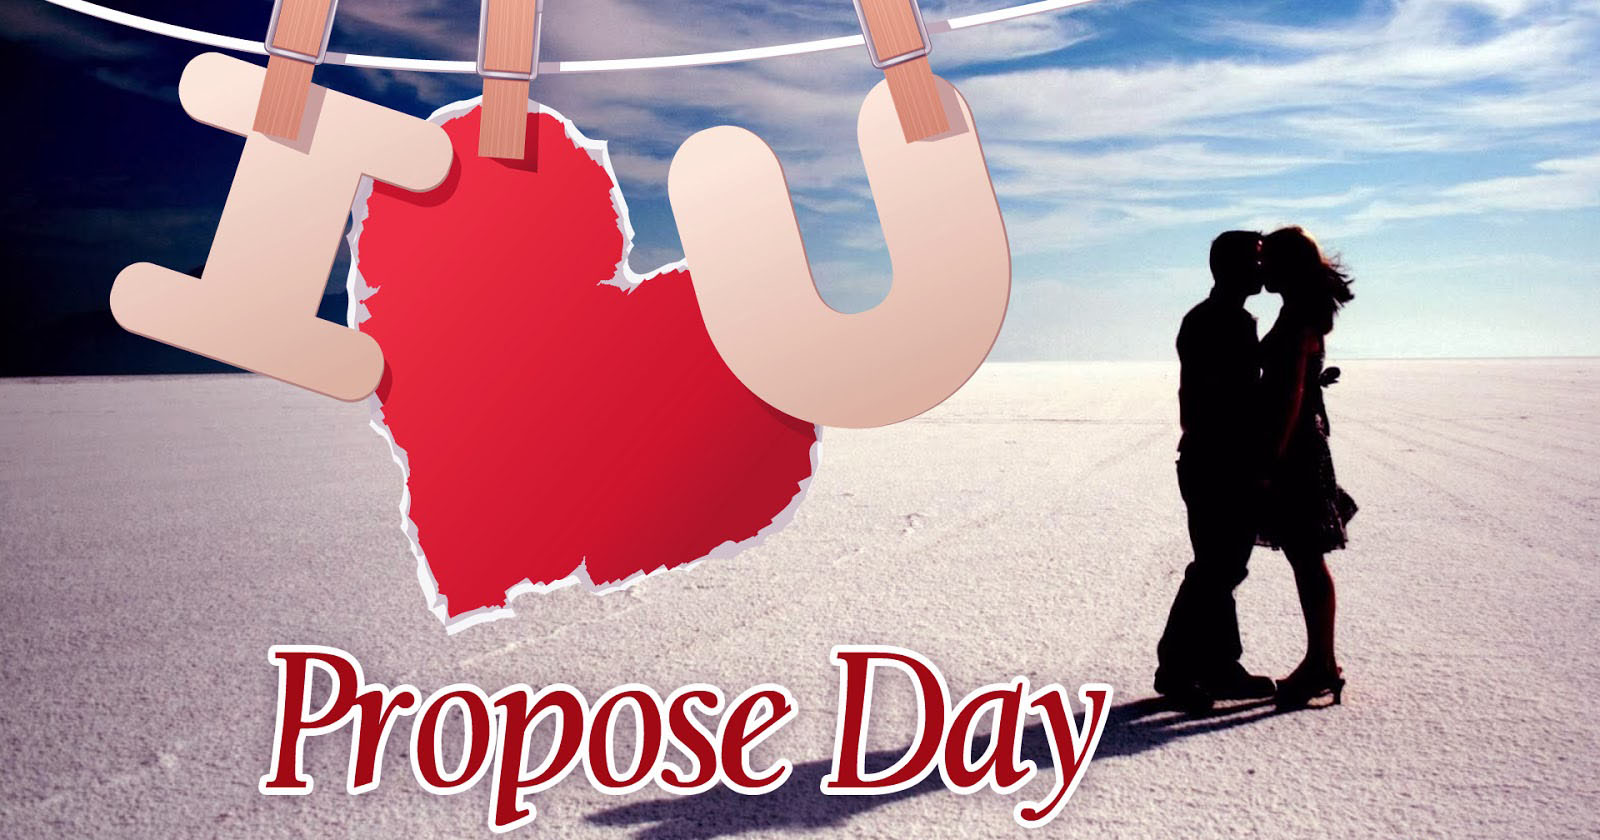 Propose Day Photos, Images and Quotes